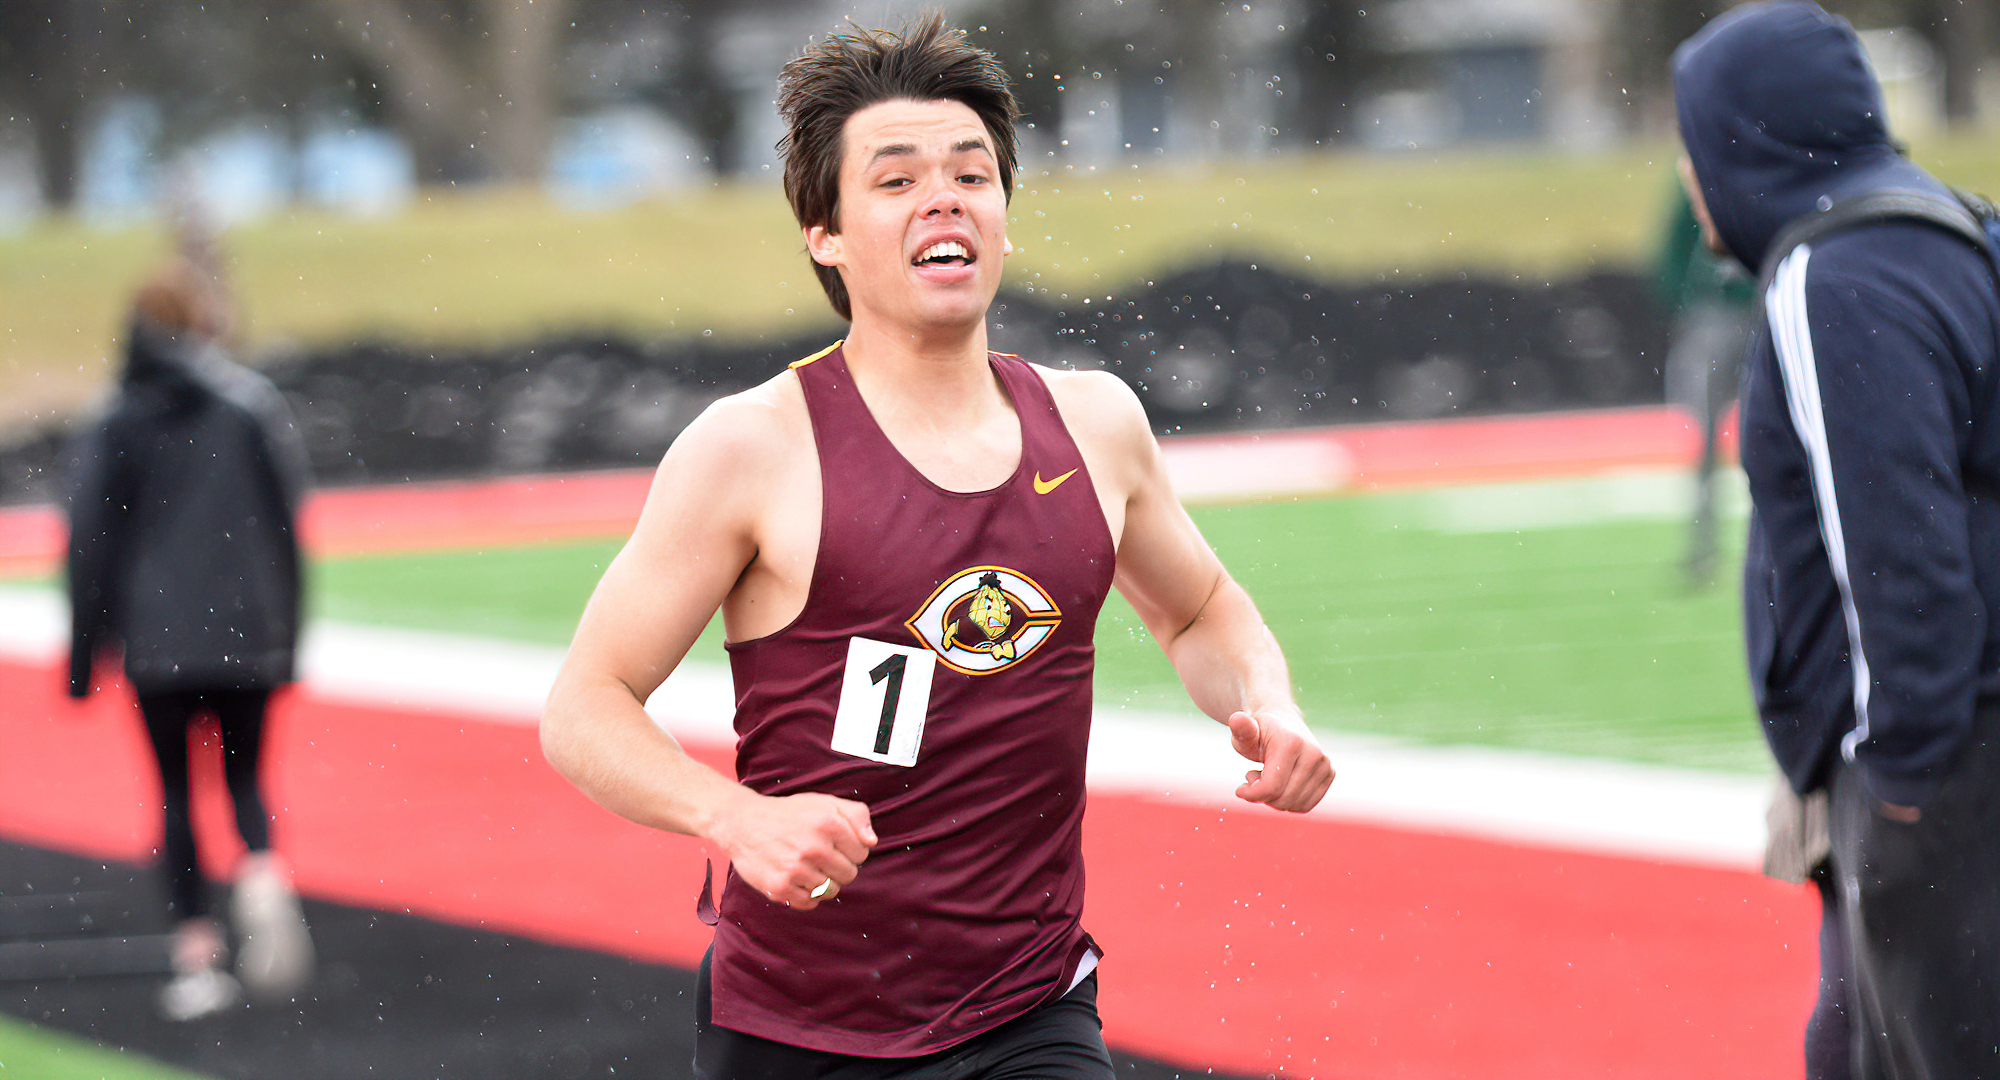 Cole Nowacki was one of several Cobbers who competed at the Simpson Open and Drake Relays. He posted a career-best time in the 3K steeplechase.